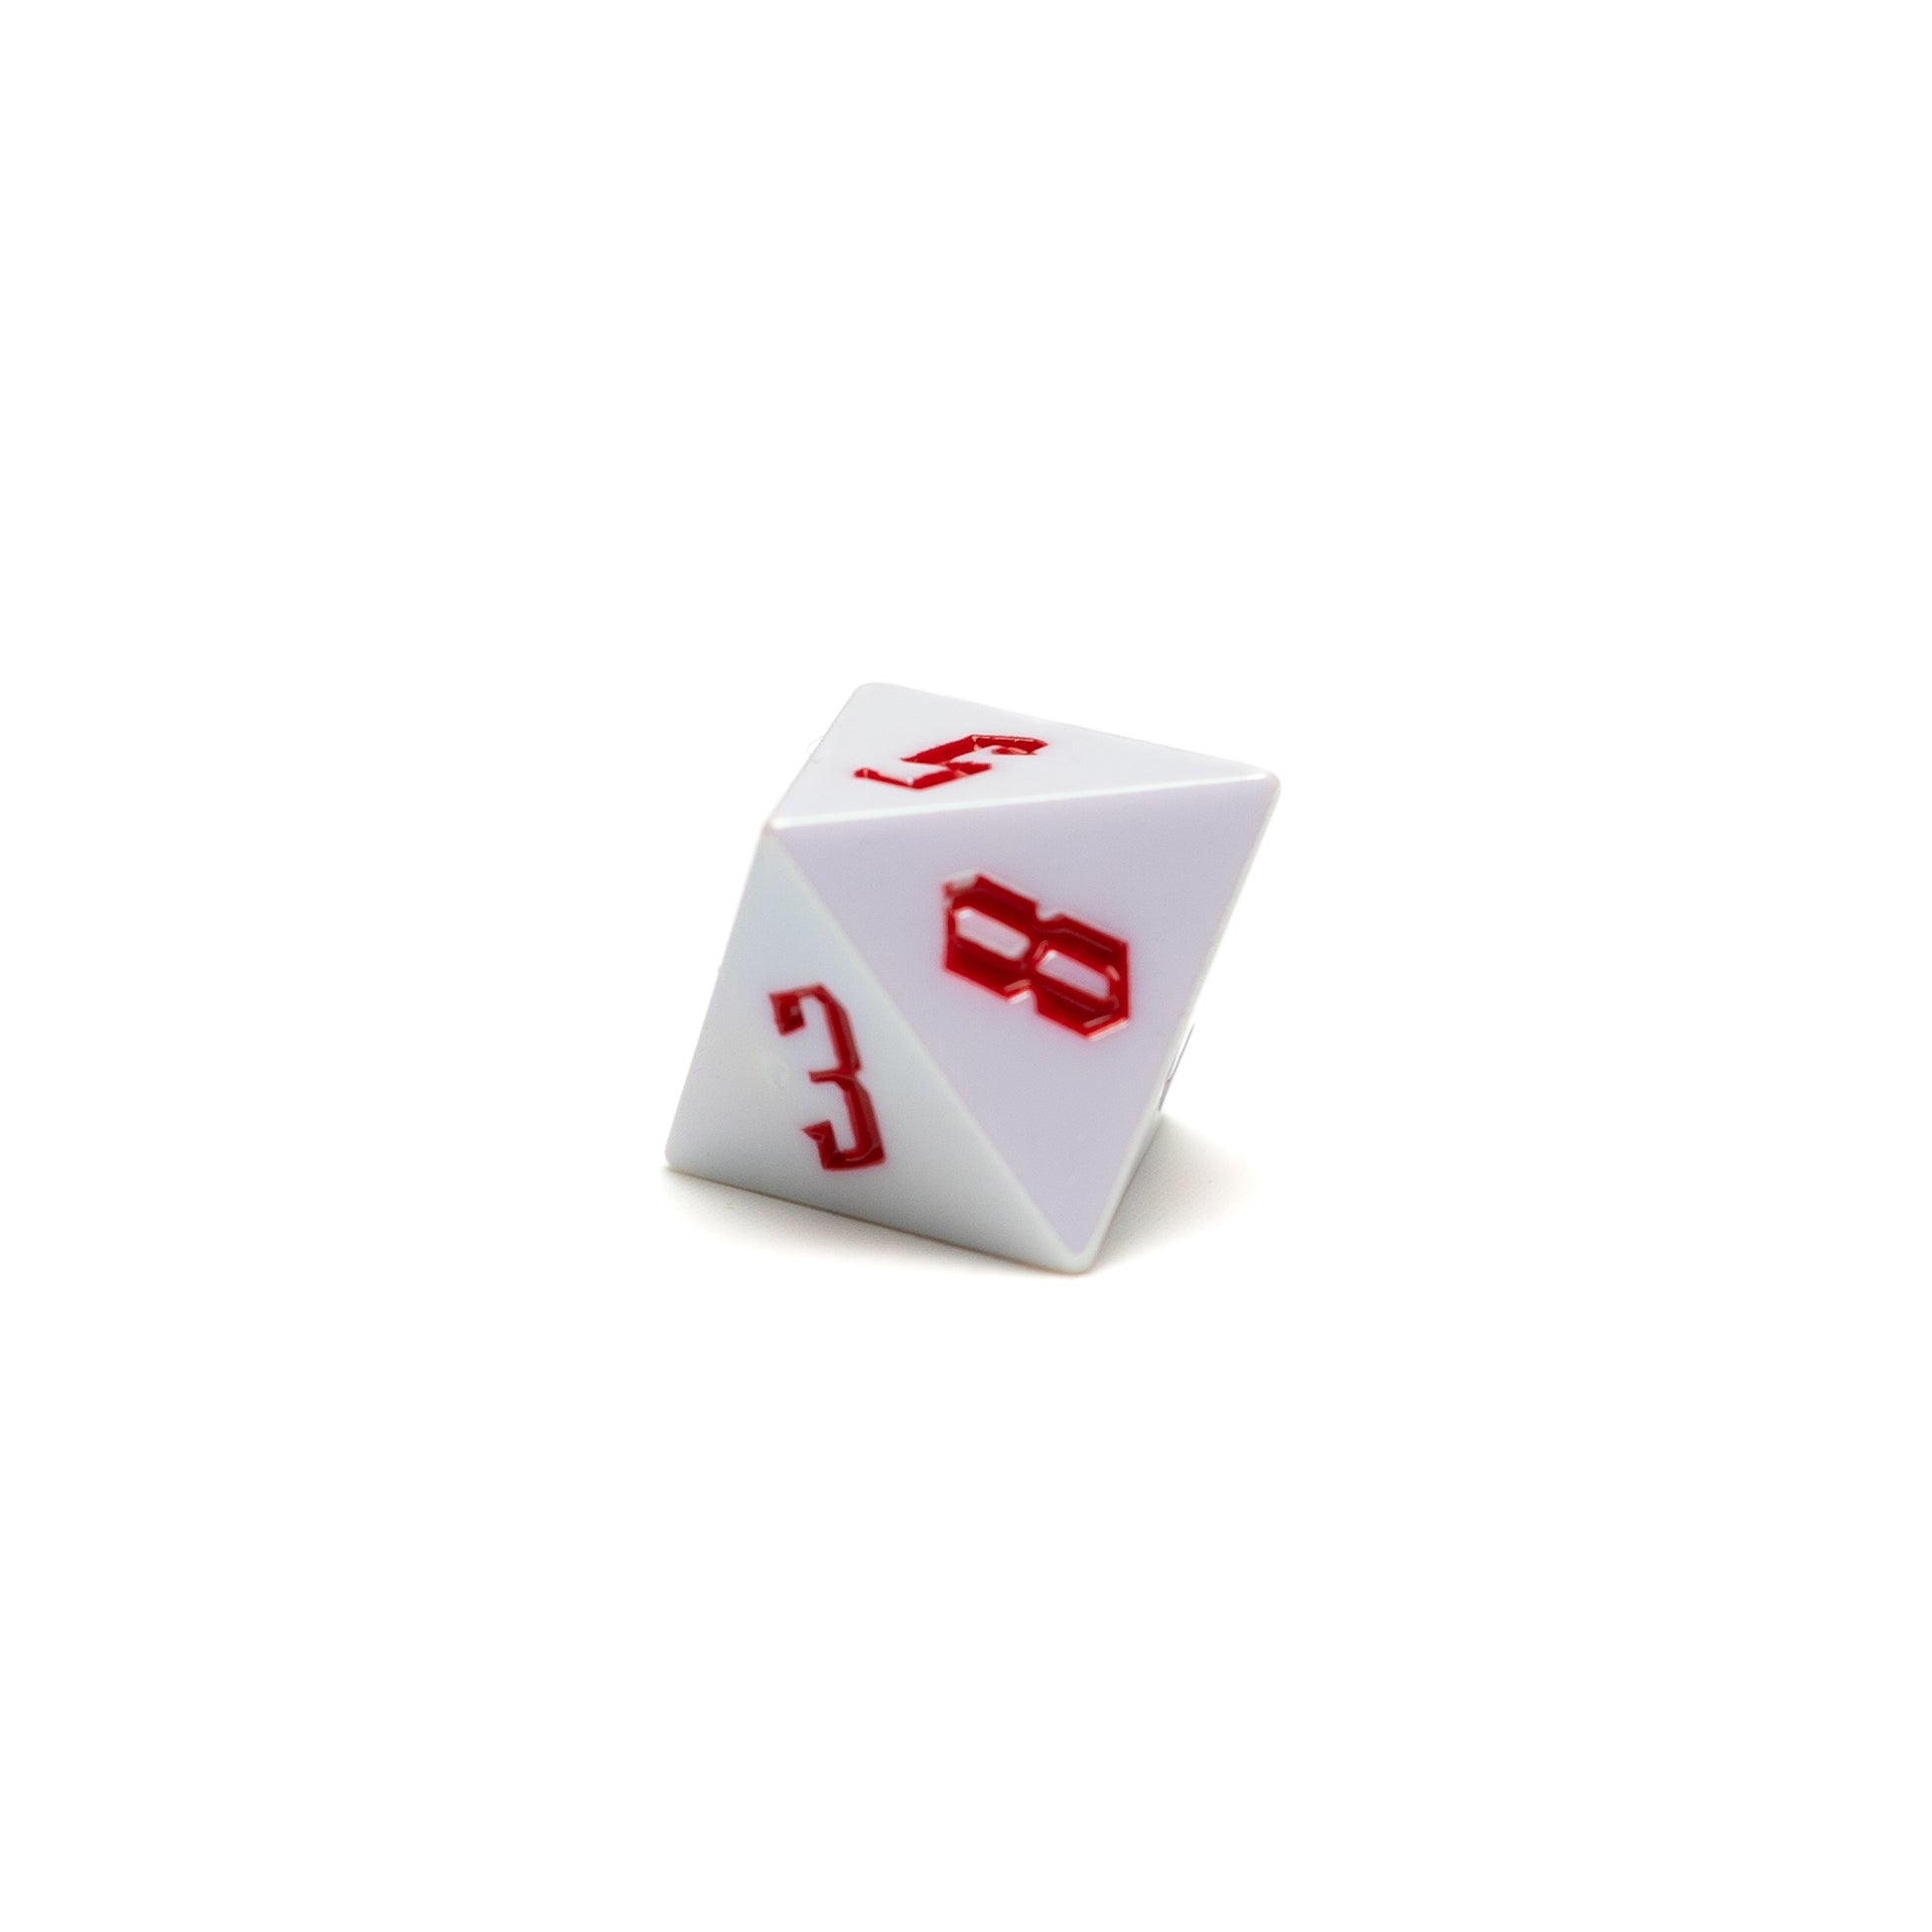 Roll Britannia Royal Guard Sharp Edged Electroplating Dungeons and Dragons D8 Dice with Red and White Aesthetic